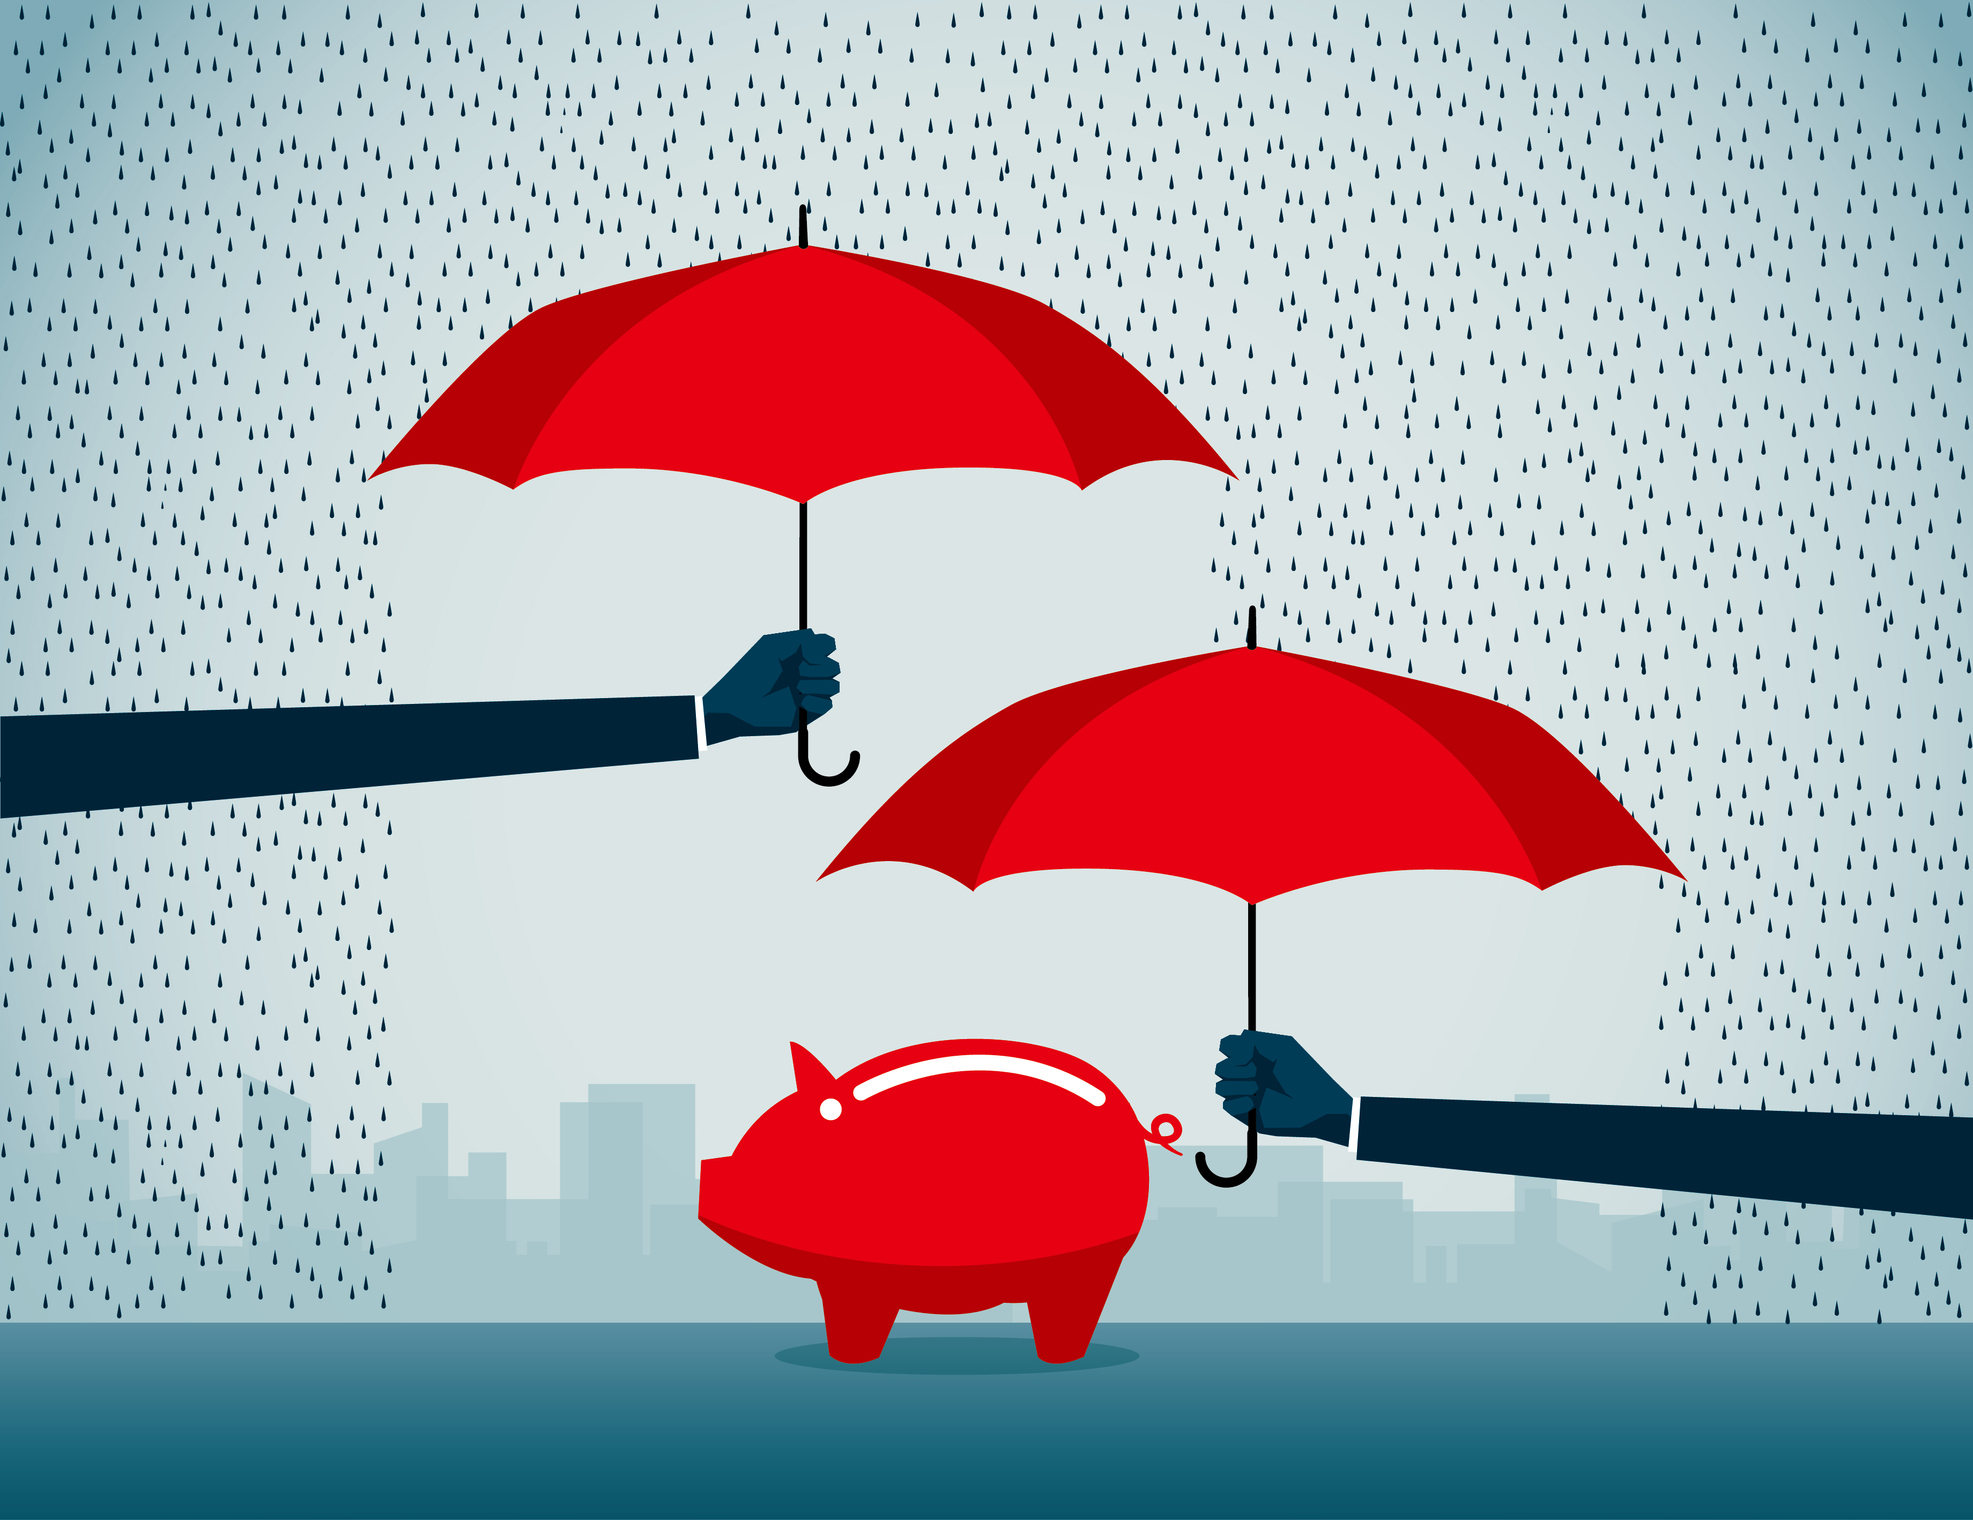 Image of a red piggy bank in the rain with two people holding red umbrellas over it